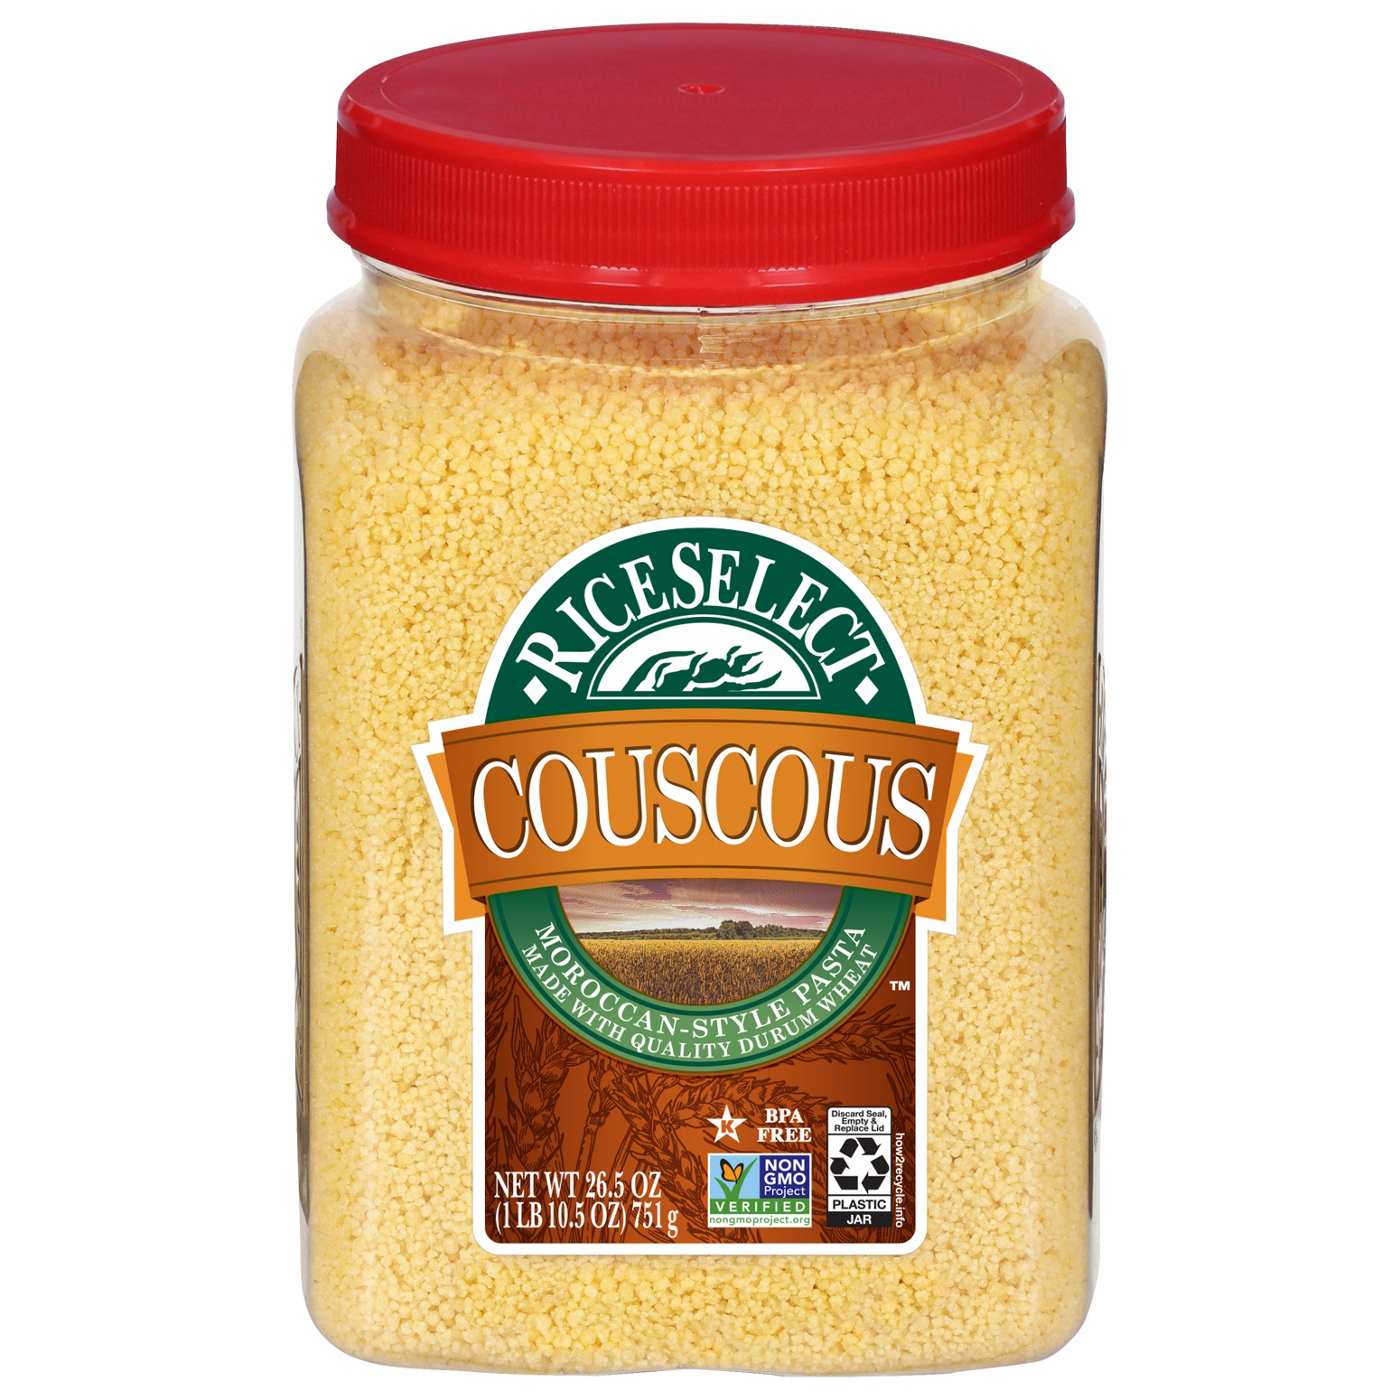 RiceSelect Original Couscous; image 1 of 6